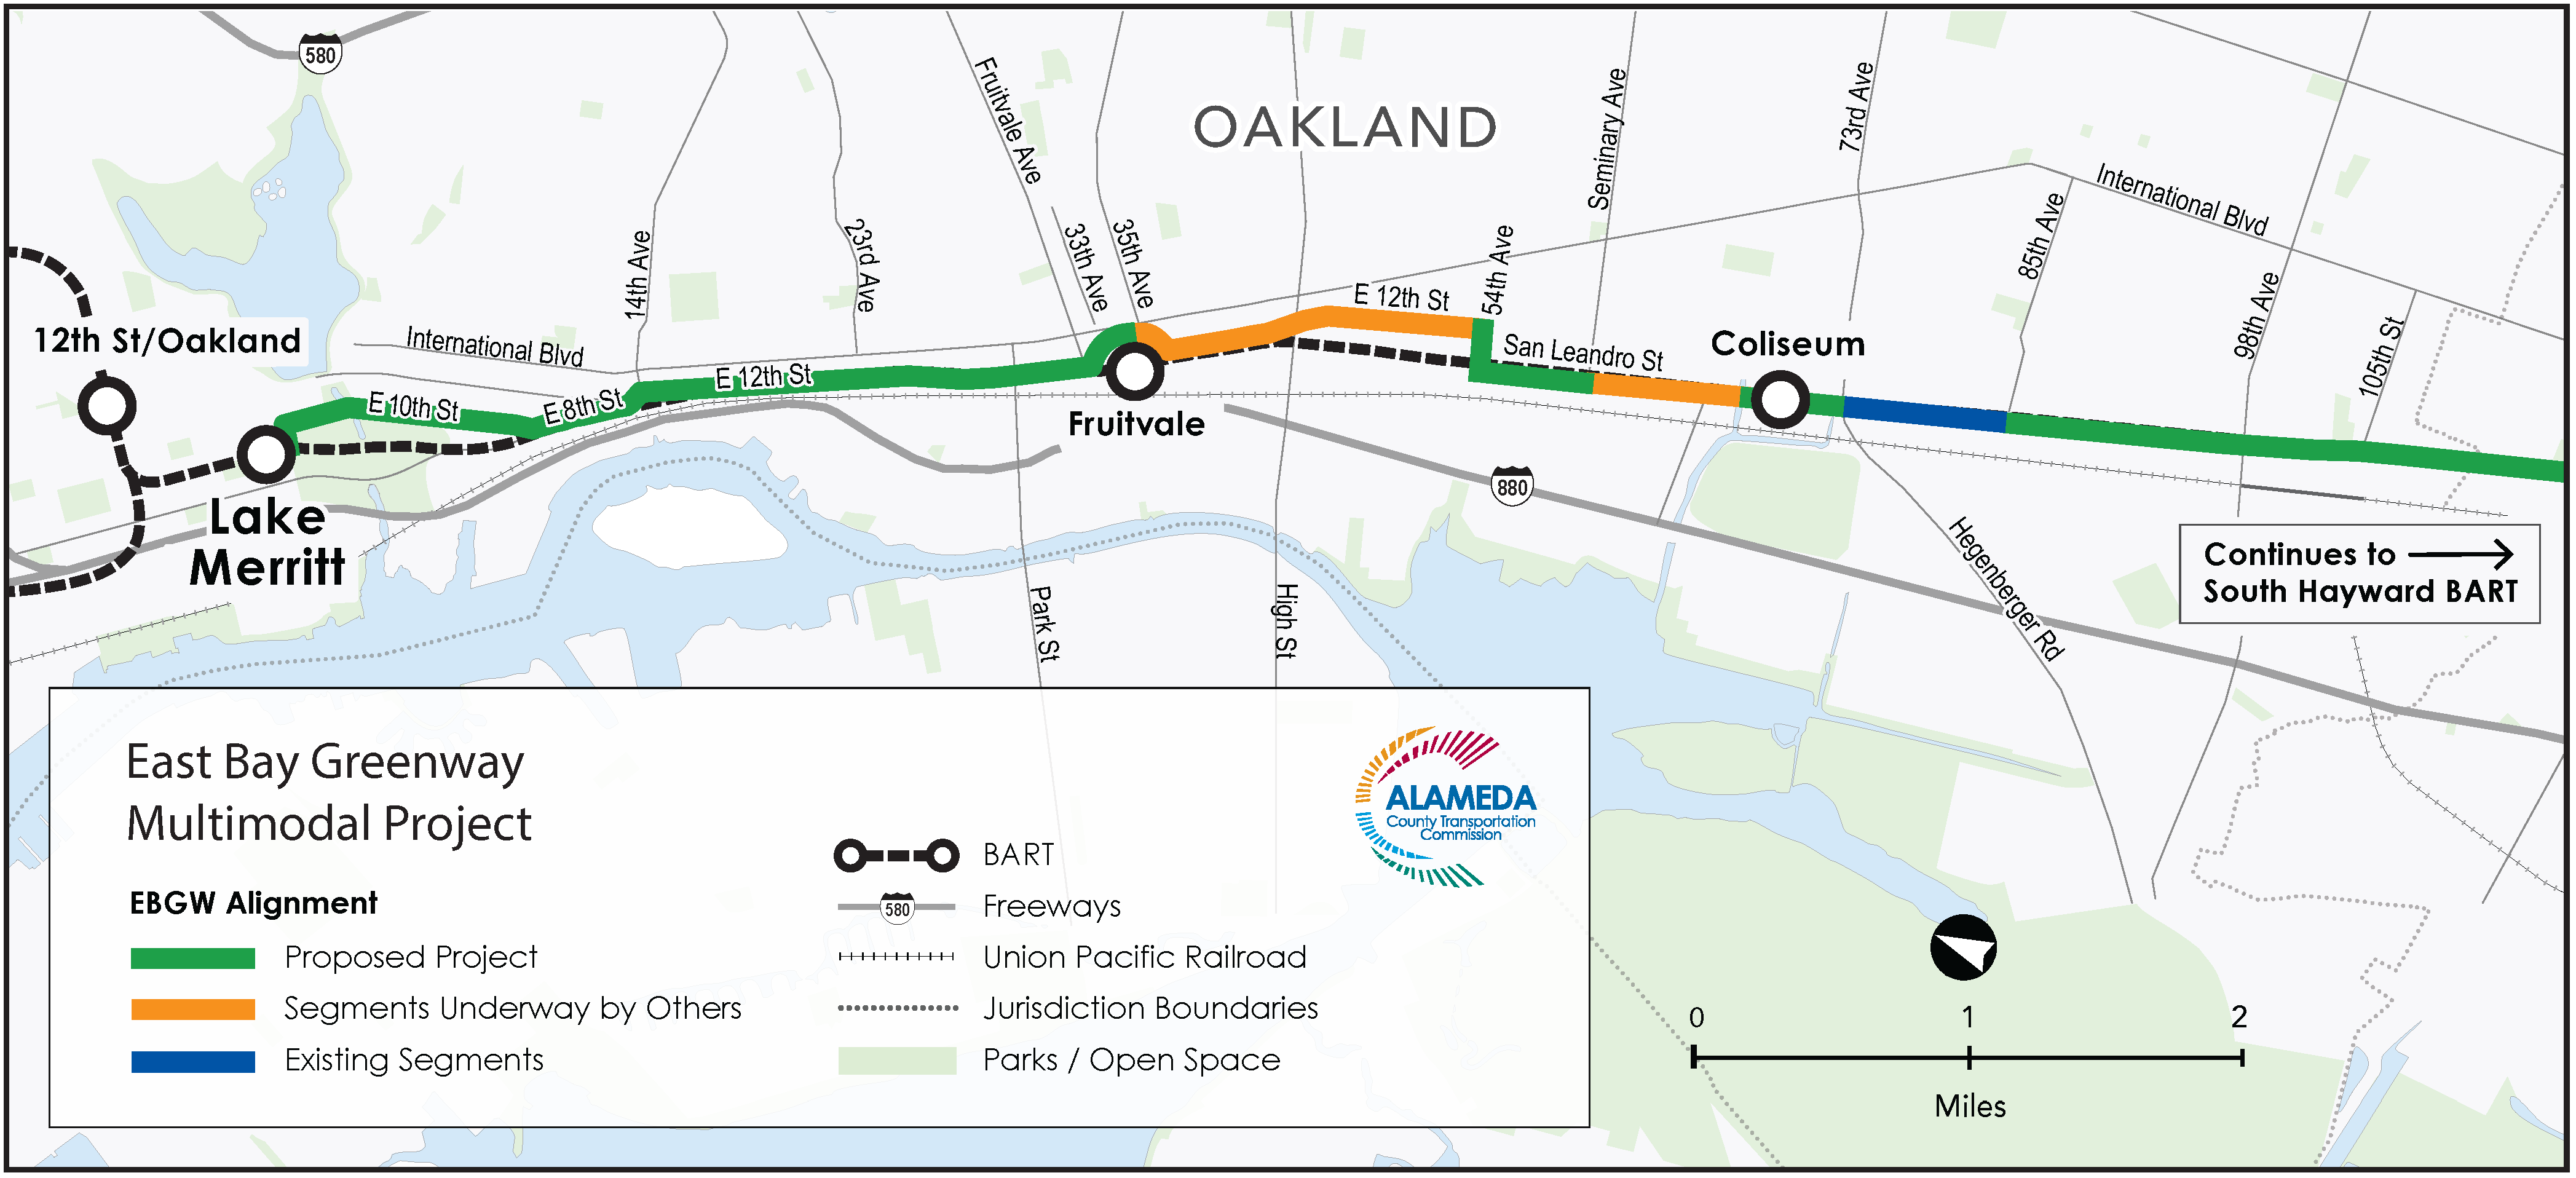 project area map of east bay greenway, phase 1 in oakland